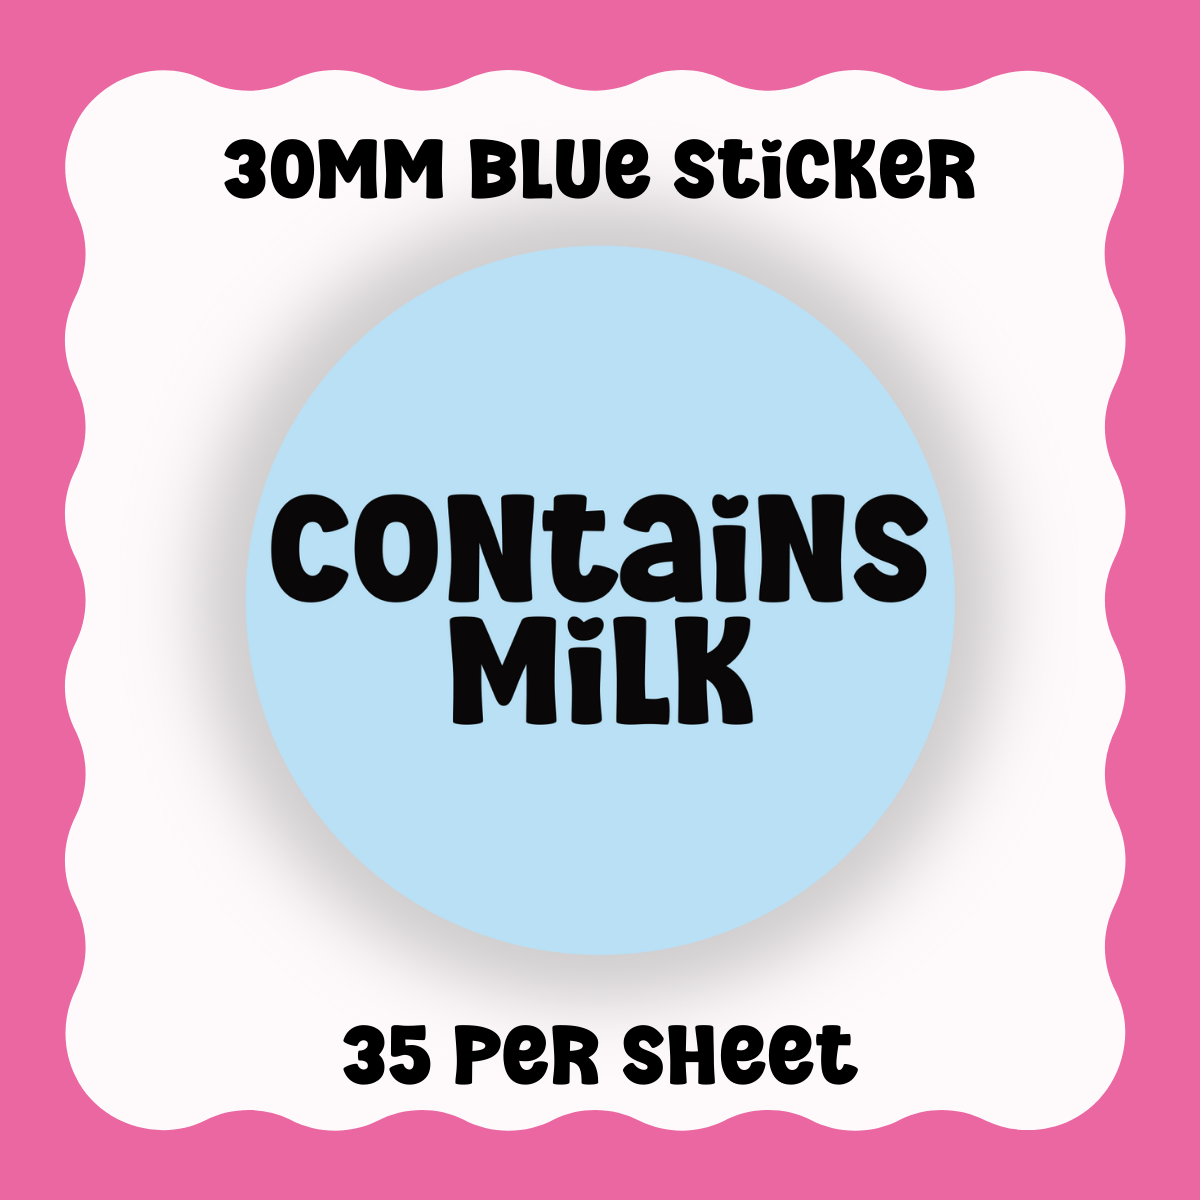 Contains Milk - Text only